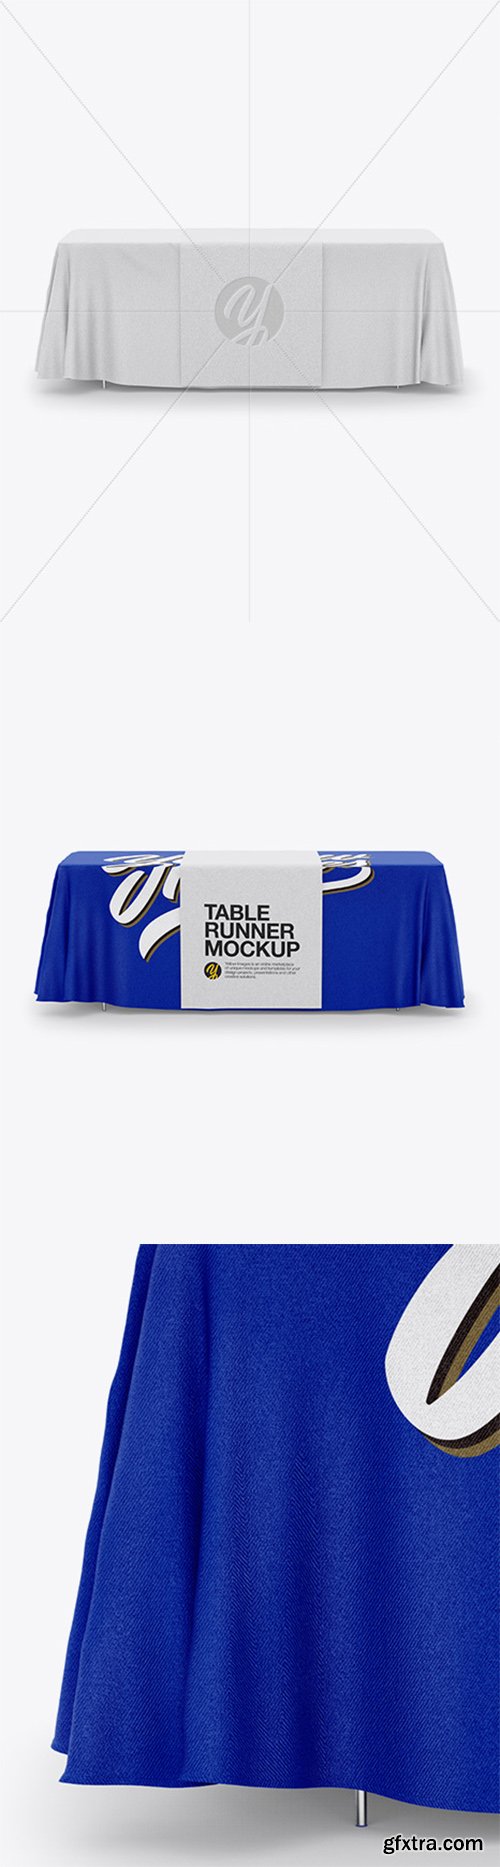 Tablecloth with Table Runner Mockup 20467